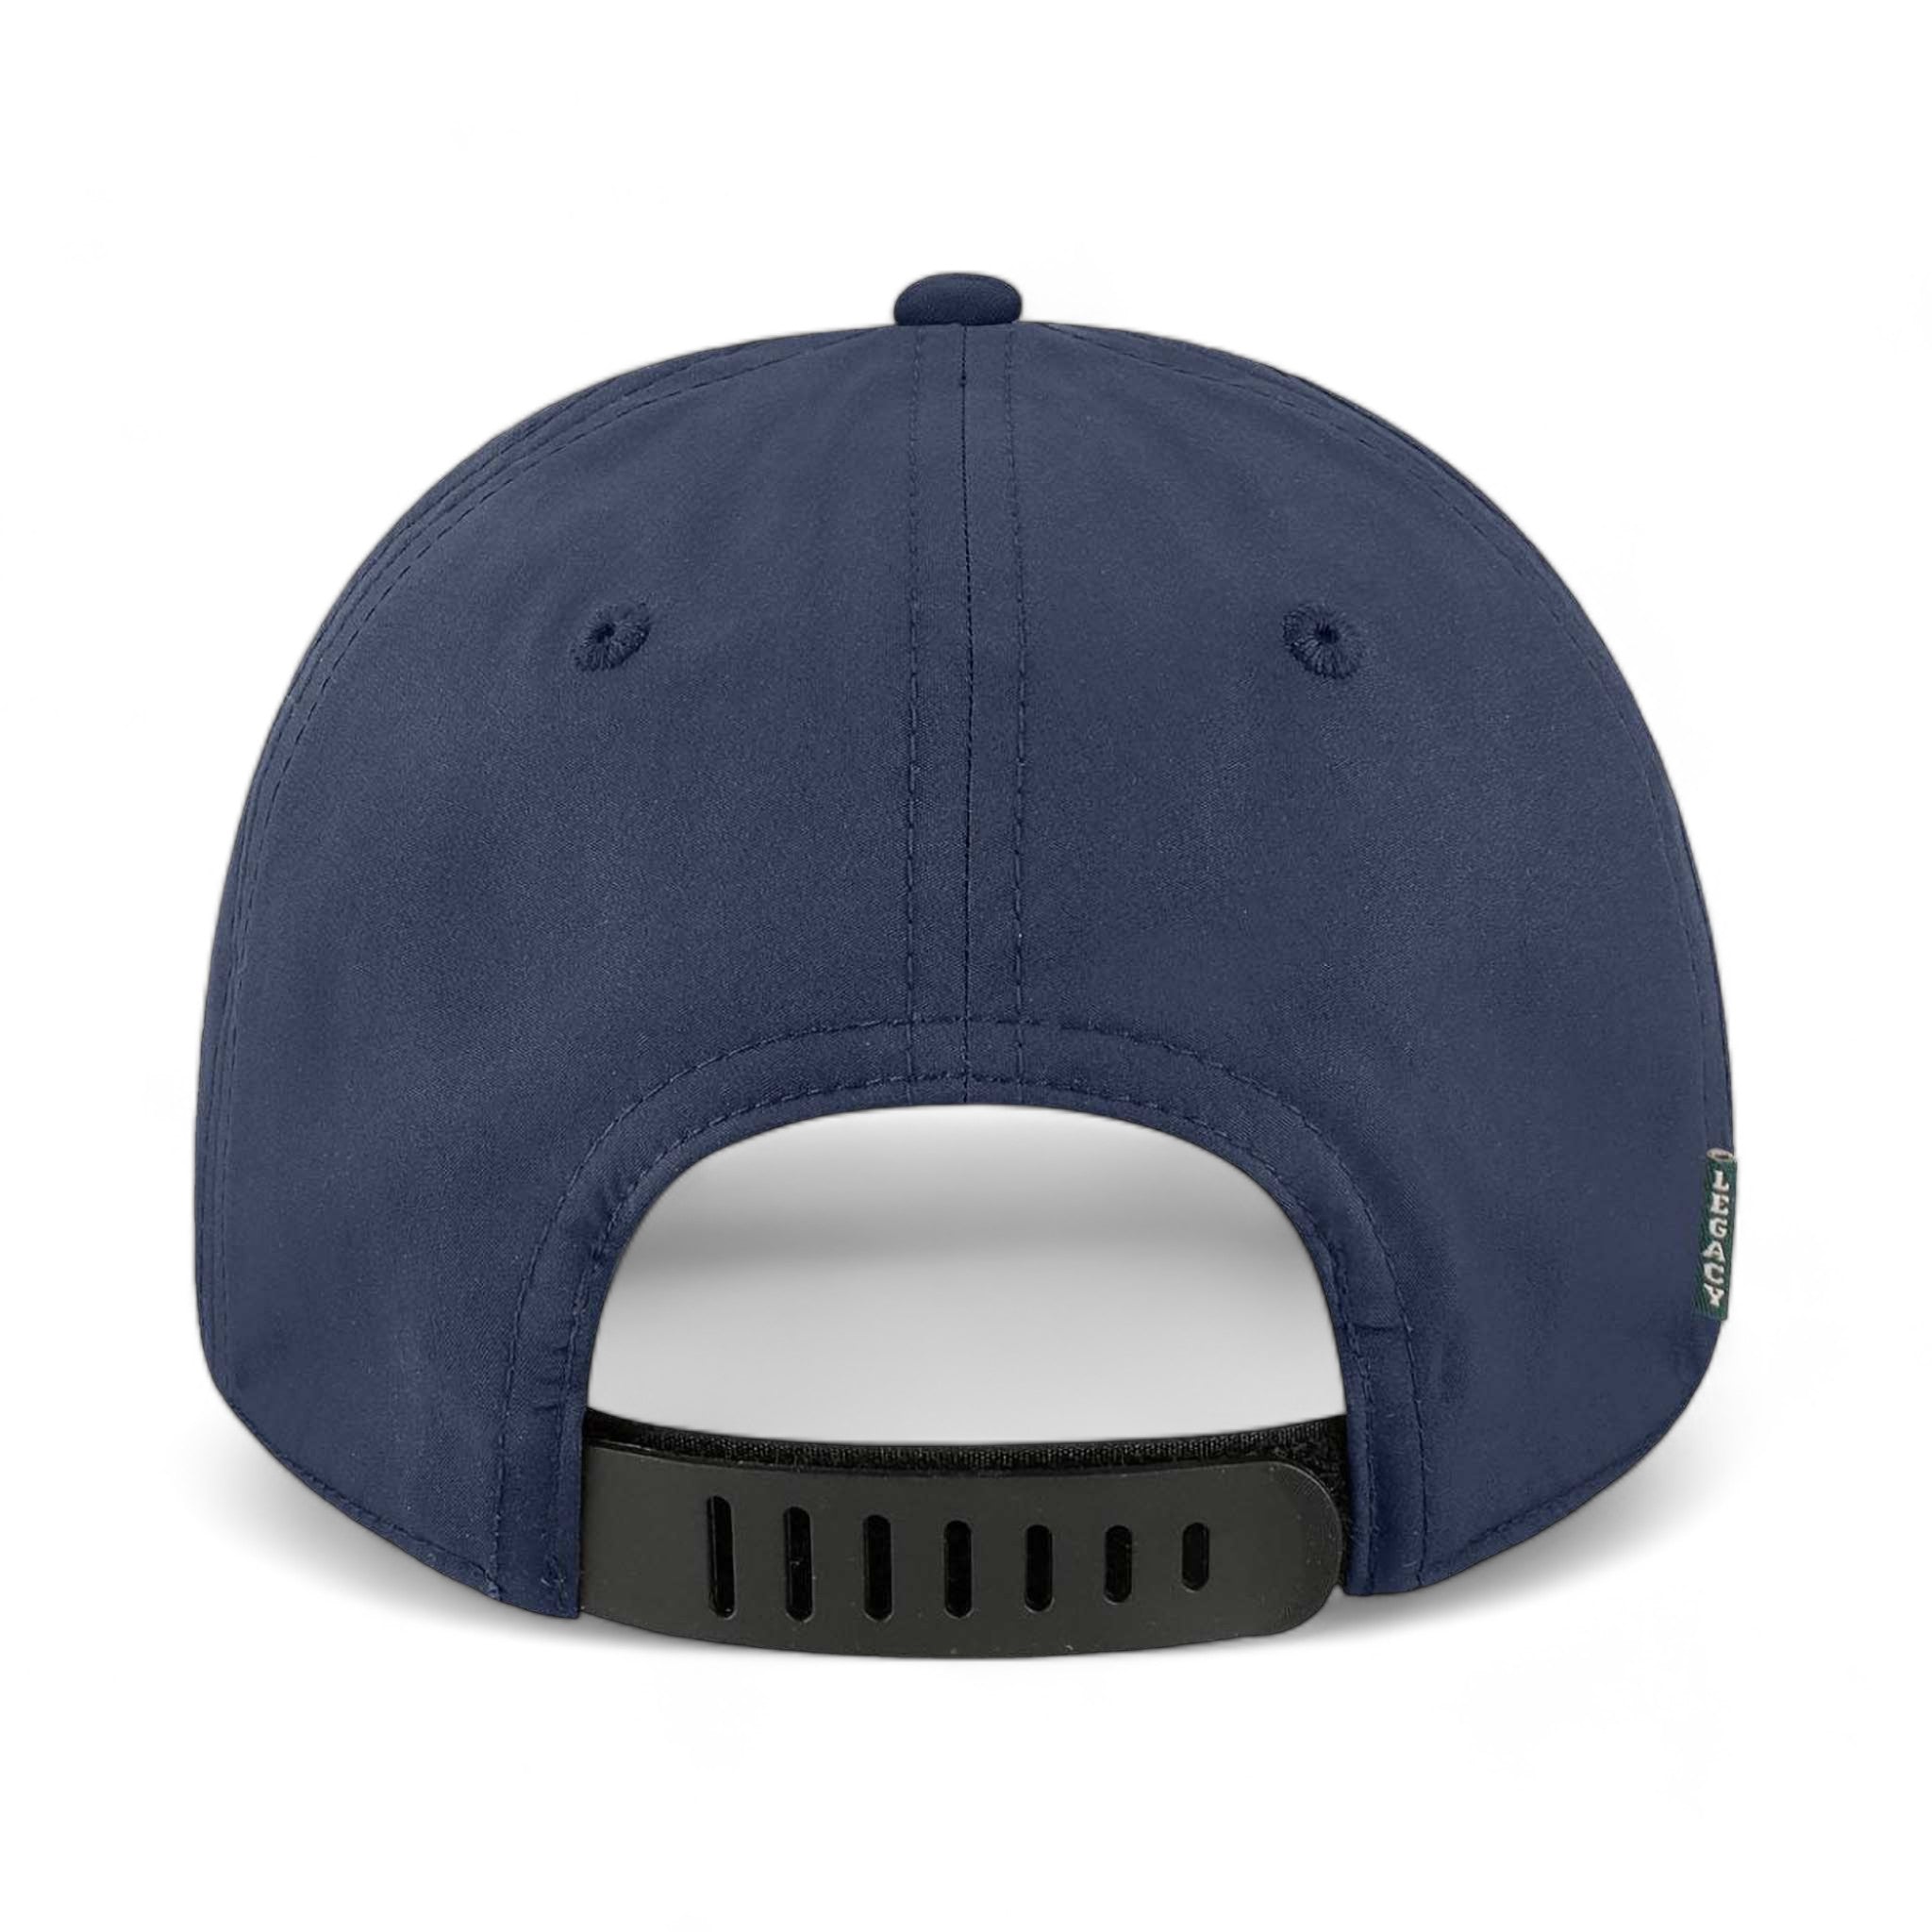 Back view of LEGACY B9A custom hat in navy